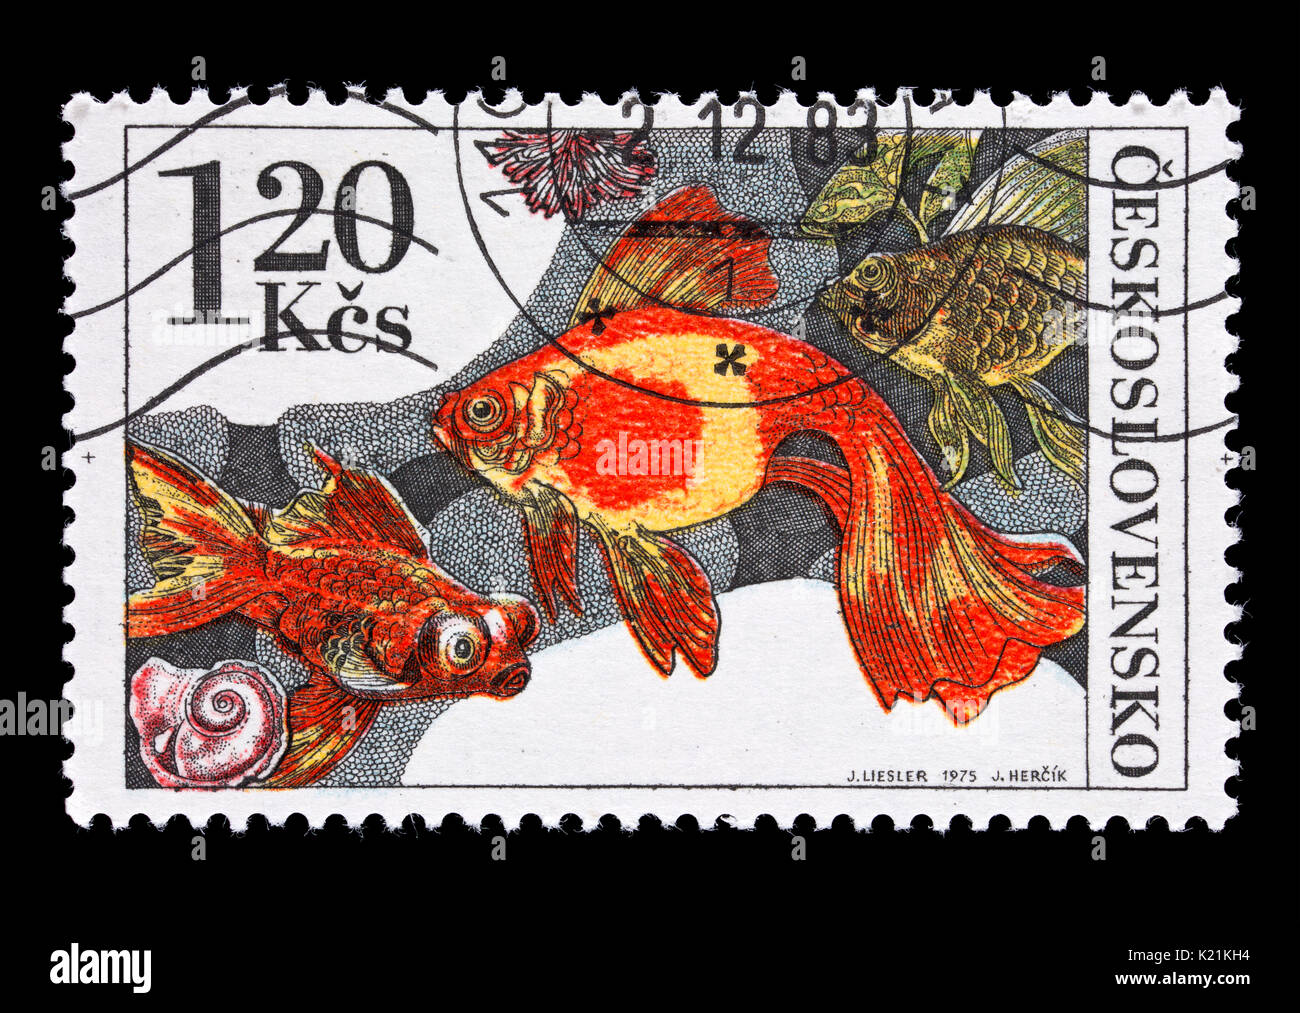 Postage stamp from Czechoslovakia depicting a goldfish (Carassius auratus) Stock Photo